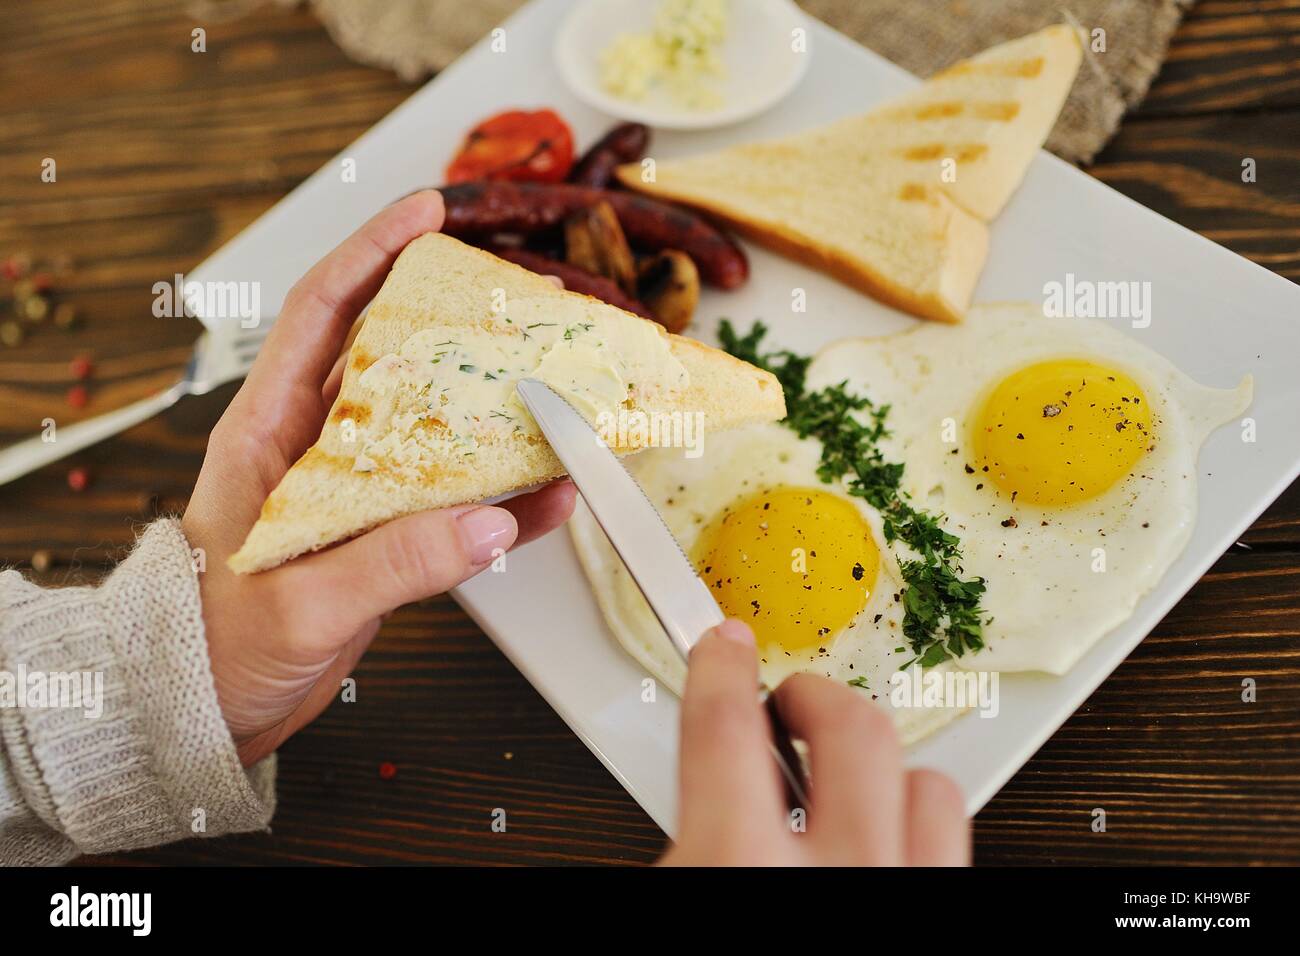 hand with a knife smears butter on bread close-up on a breakfast background Stock Photo